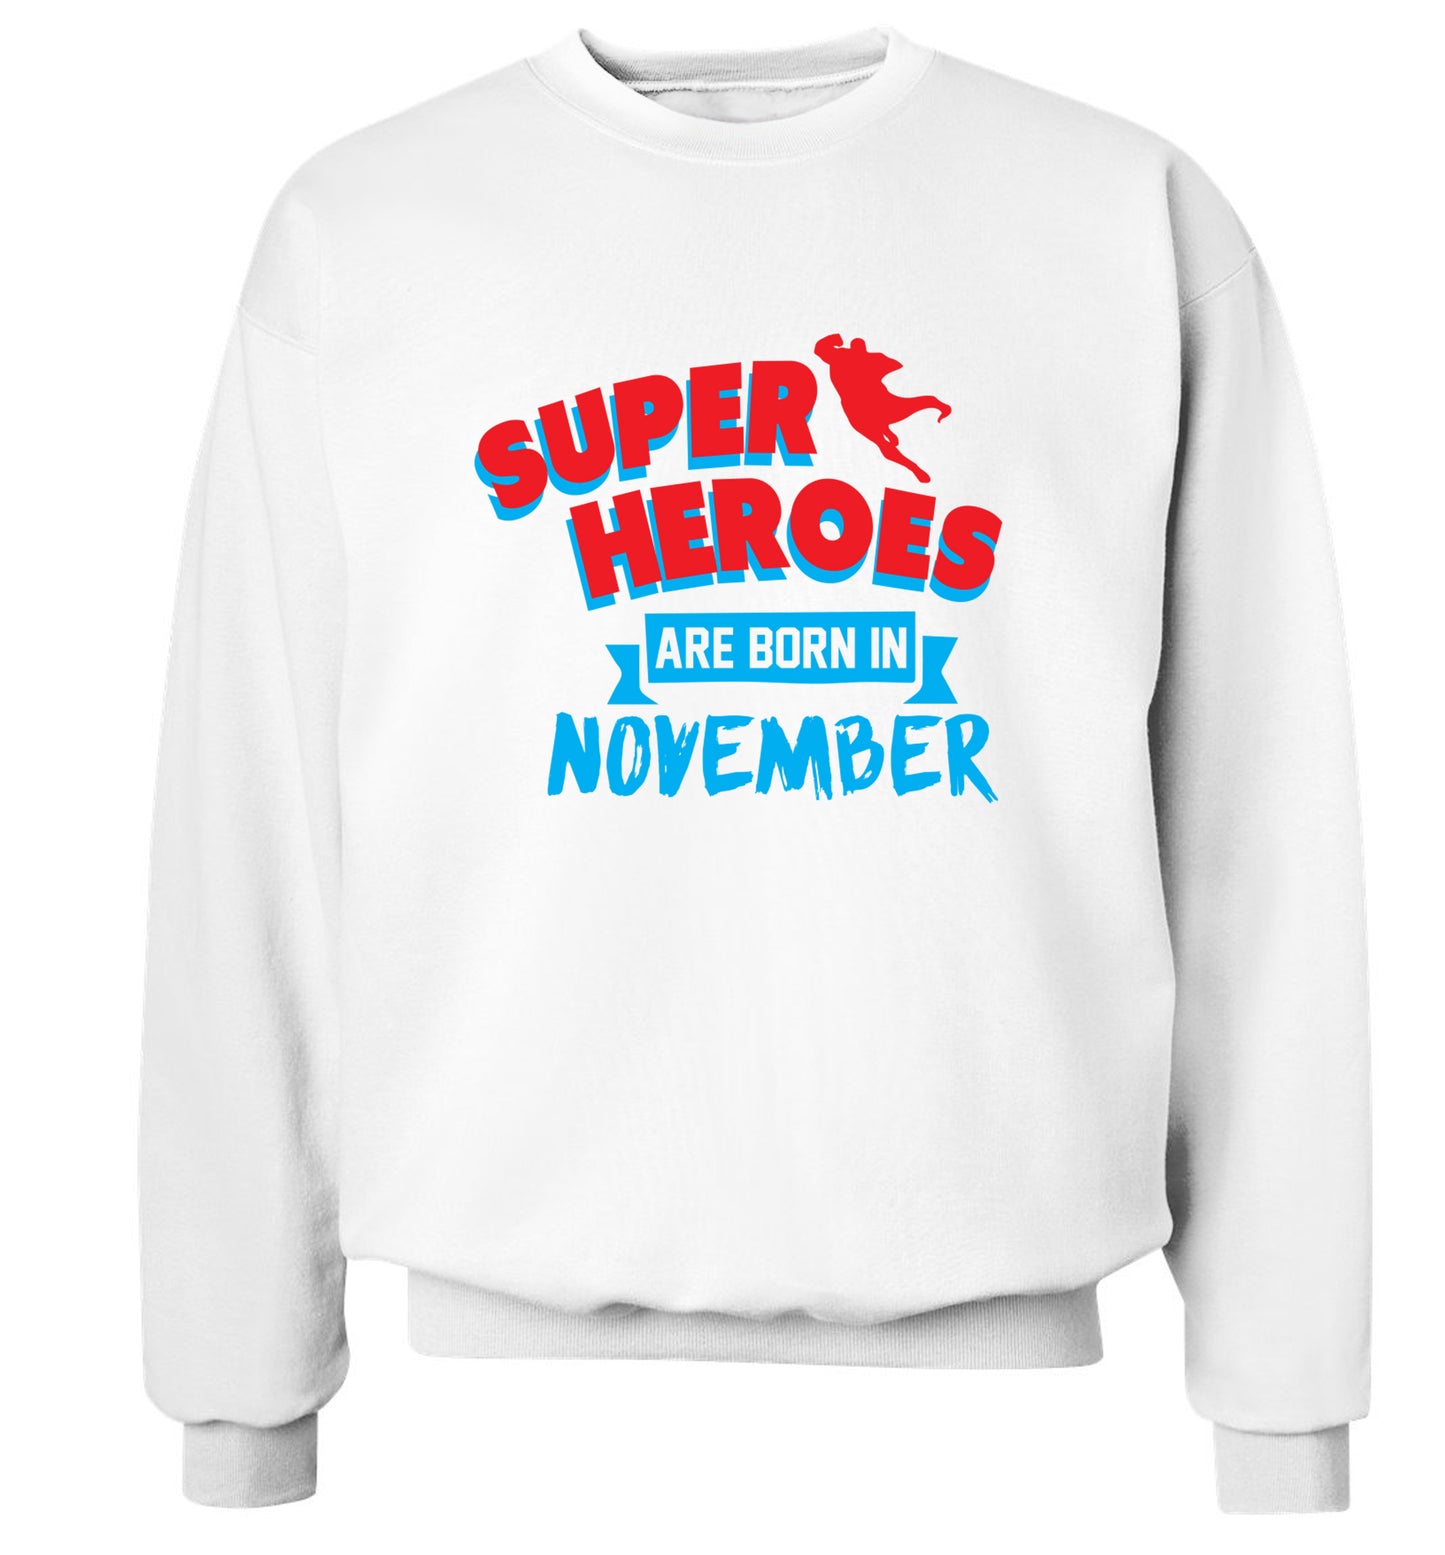 Superheroes are born in November Adult's unisex white Sweater 2XL